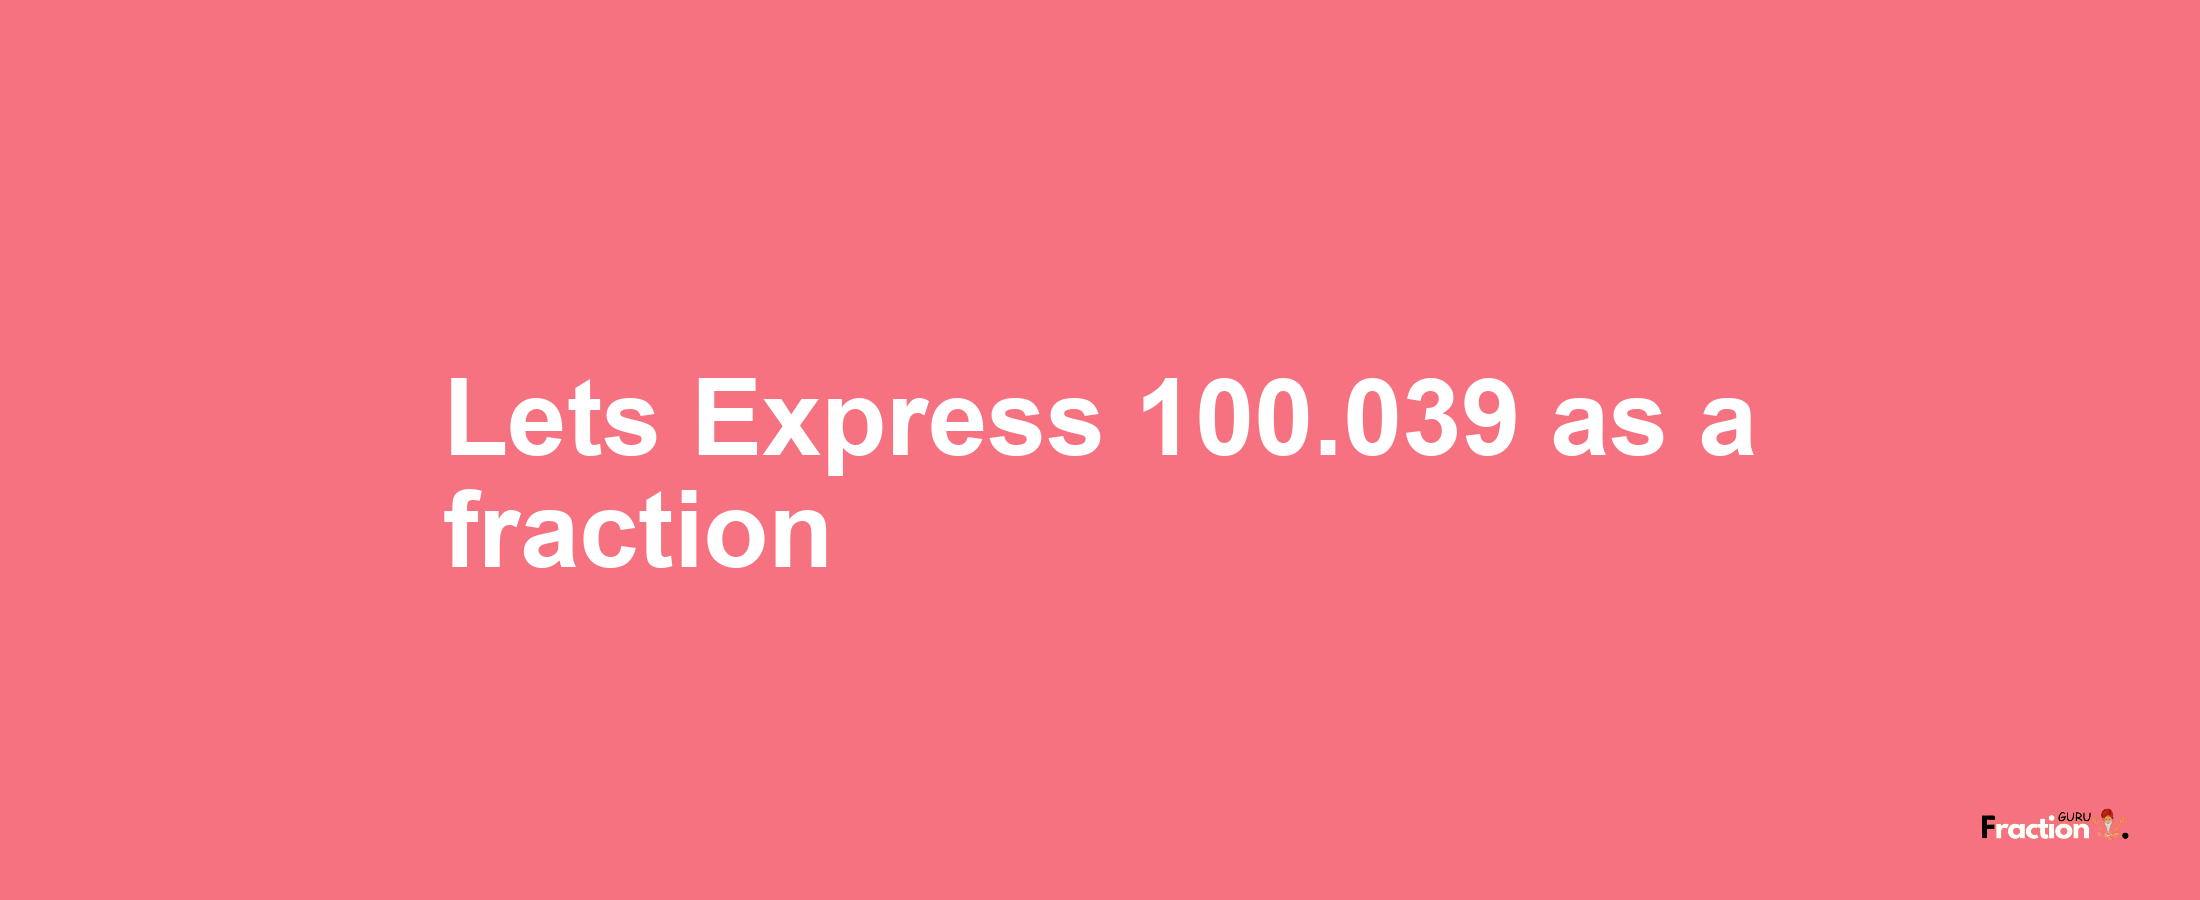 Lets Express 100.039 as afraction